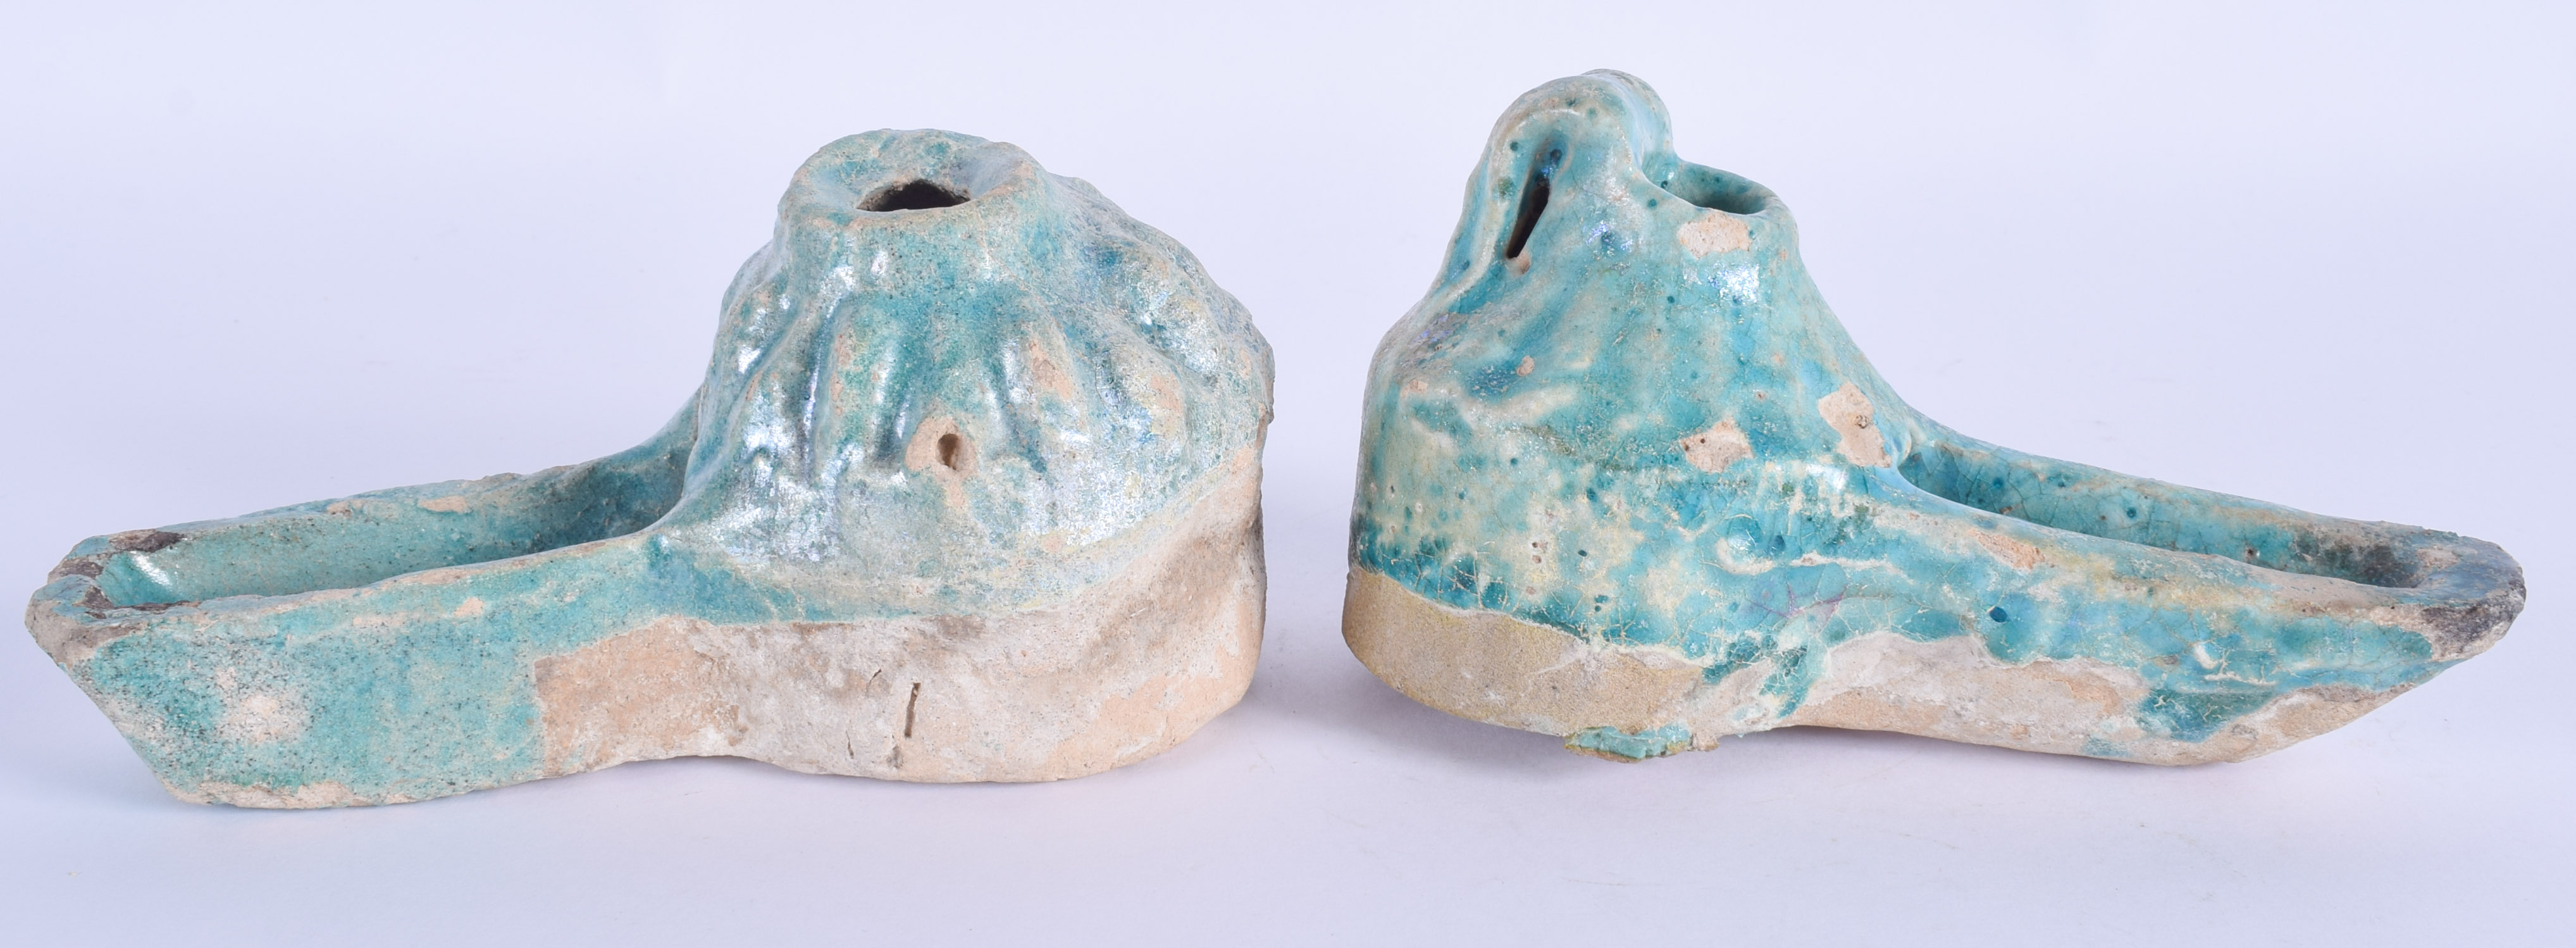 A PAIR OF 12TH/13TH CENTURY PERSIAN TURQUOISE GLAZED OIL LAMPS Iran. 14 cm x 7 cm. (2)